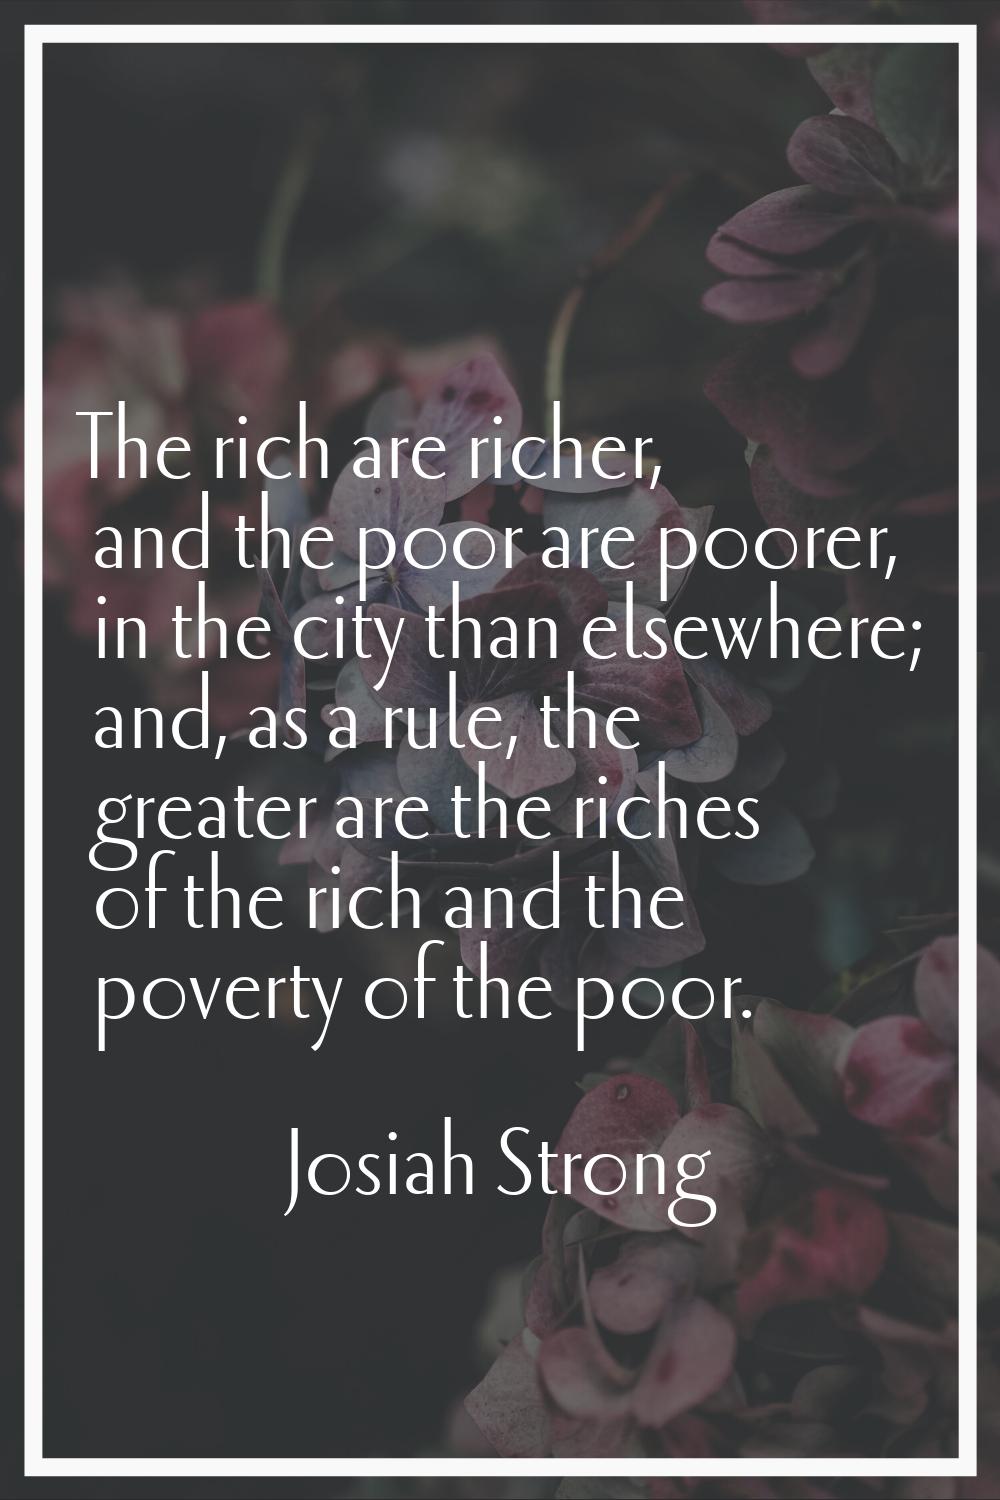 The rich are richer, and the poor are poorer, in the city than elsewhere; and, as a rule, the great